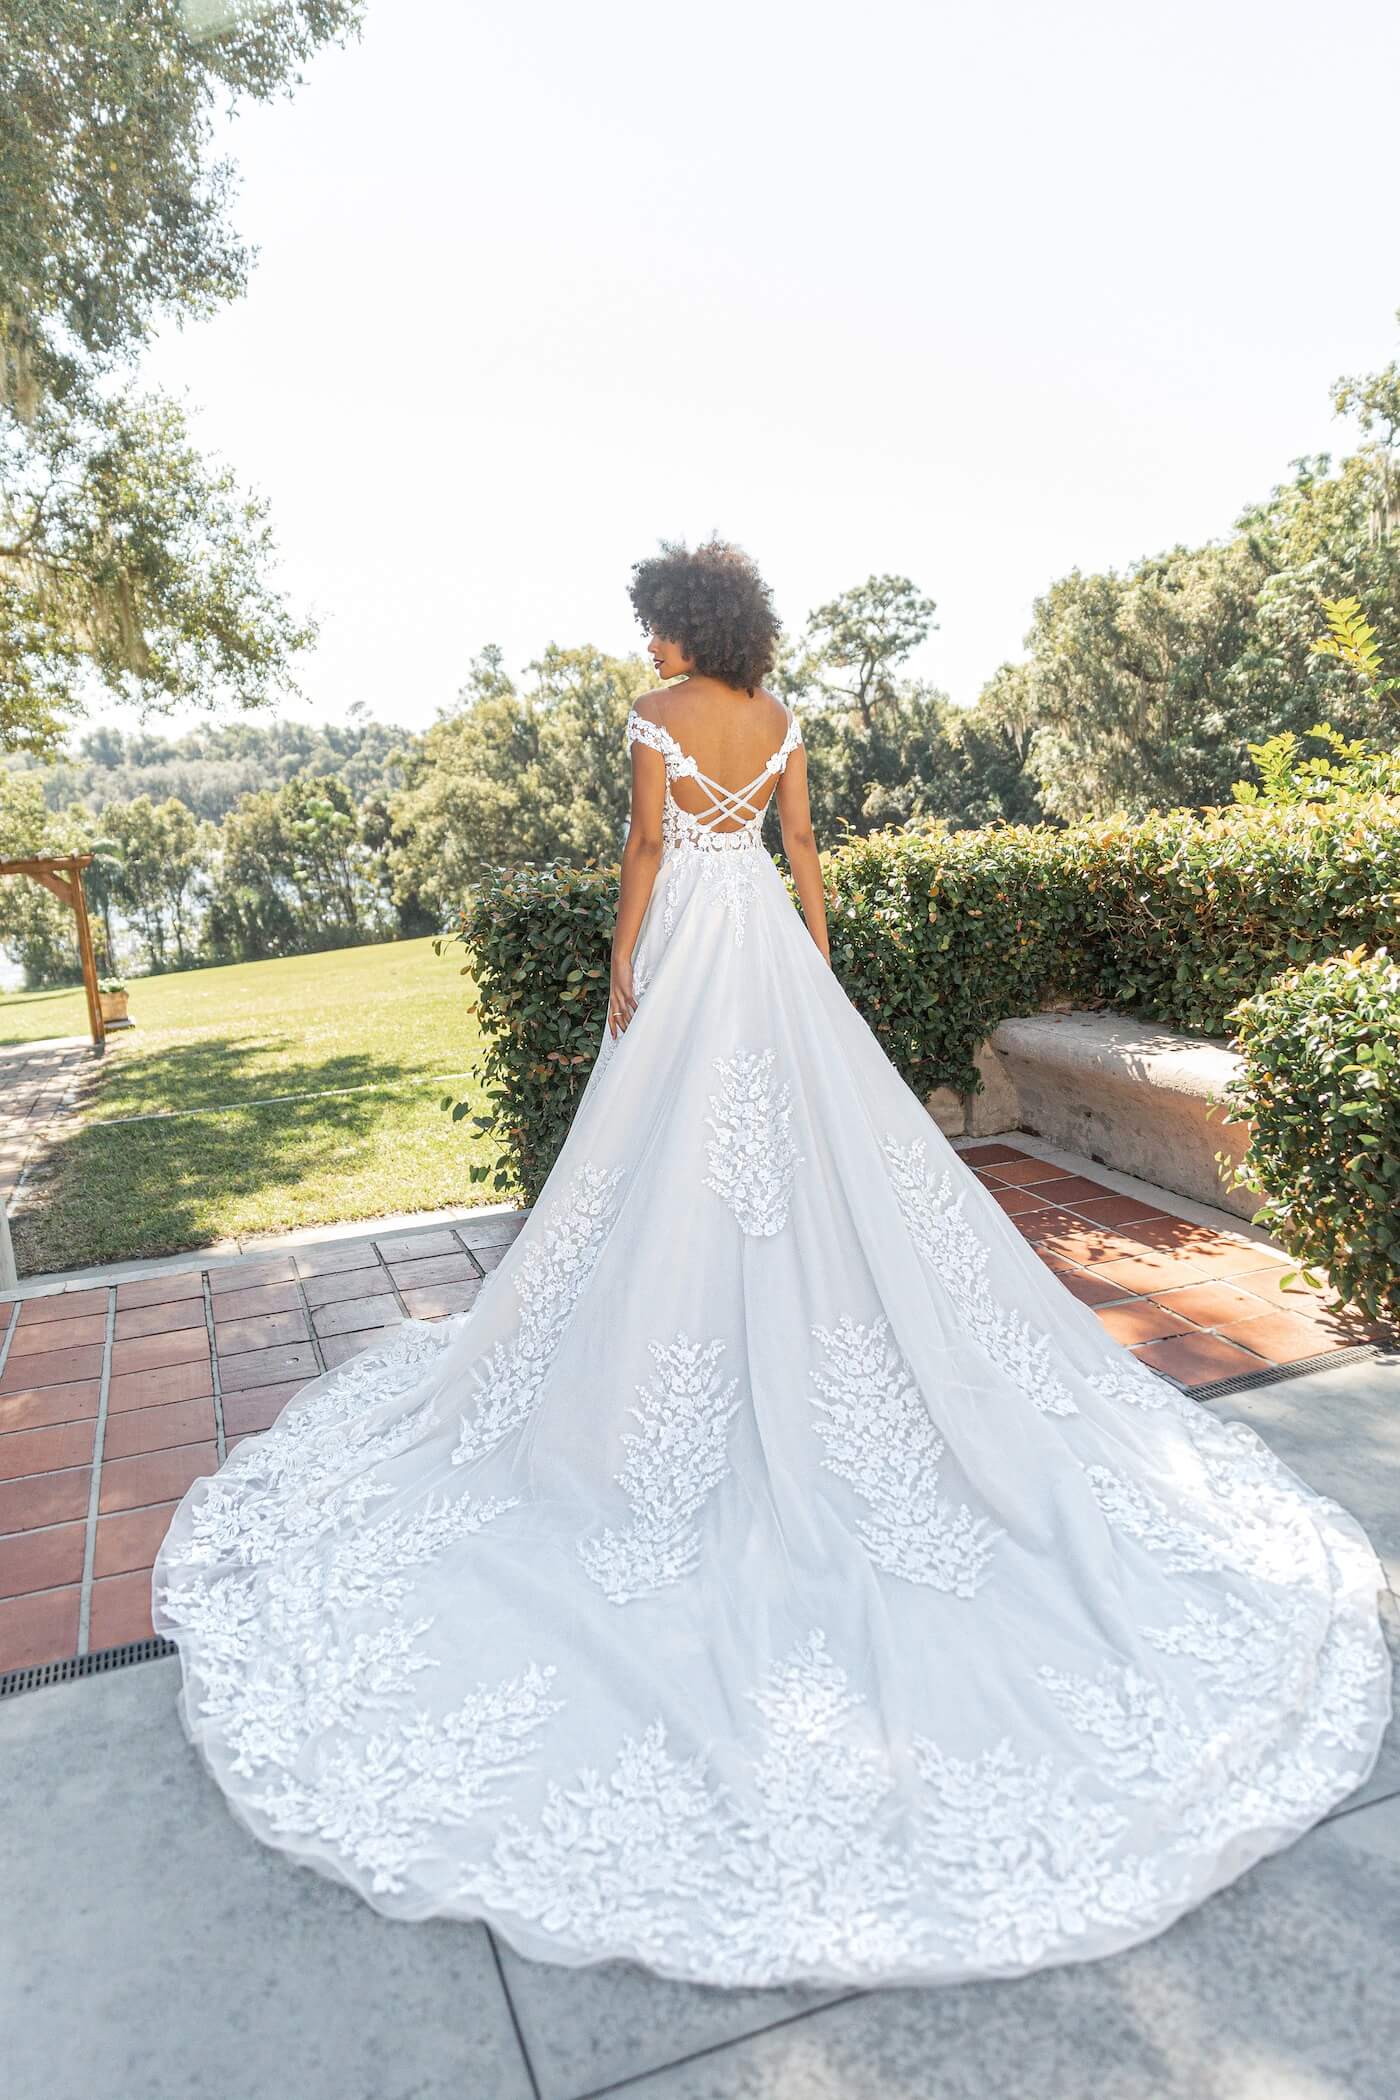 isabella_talya_anne_marie_something-new-bridal_boutique_01_1400x2100